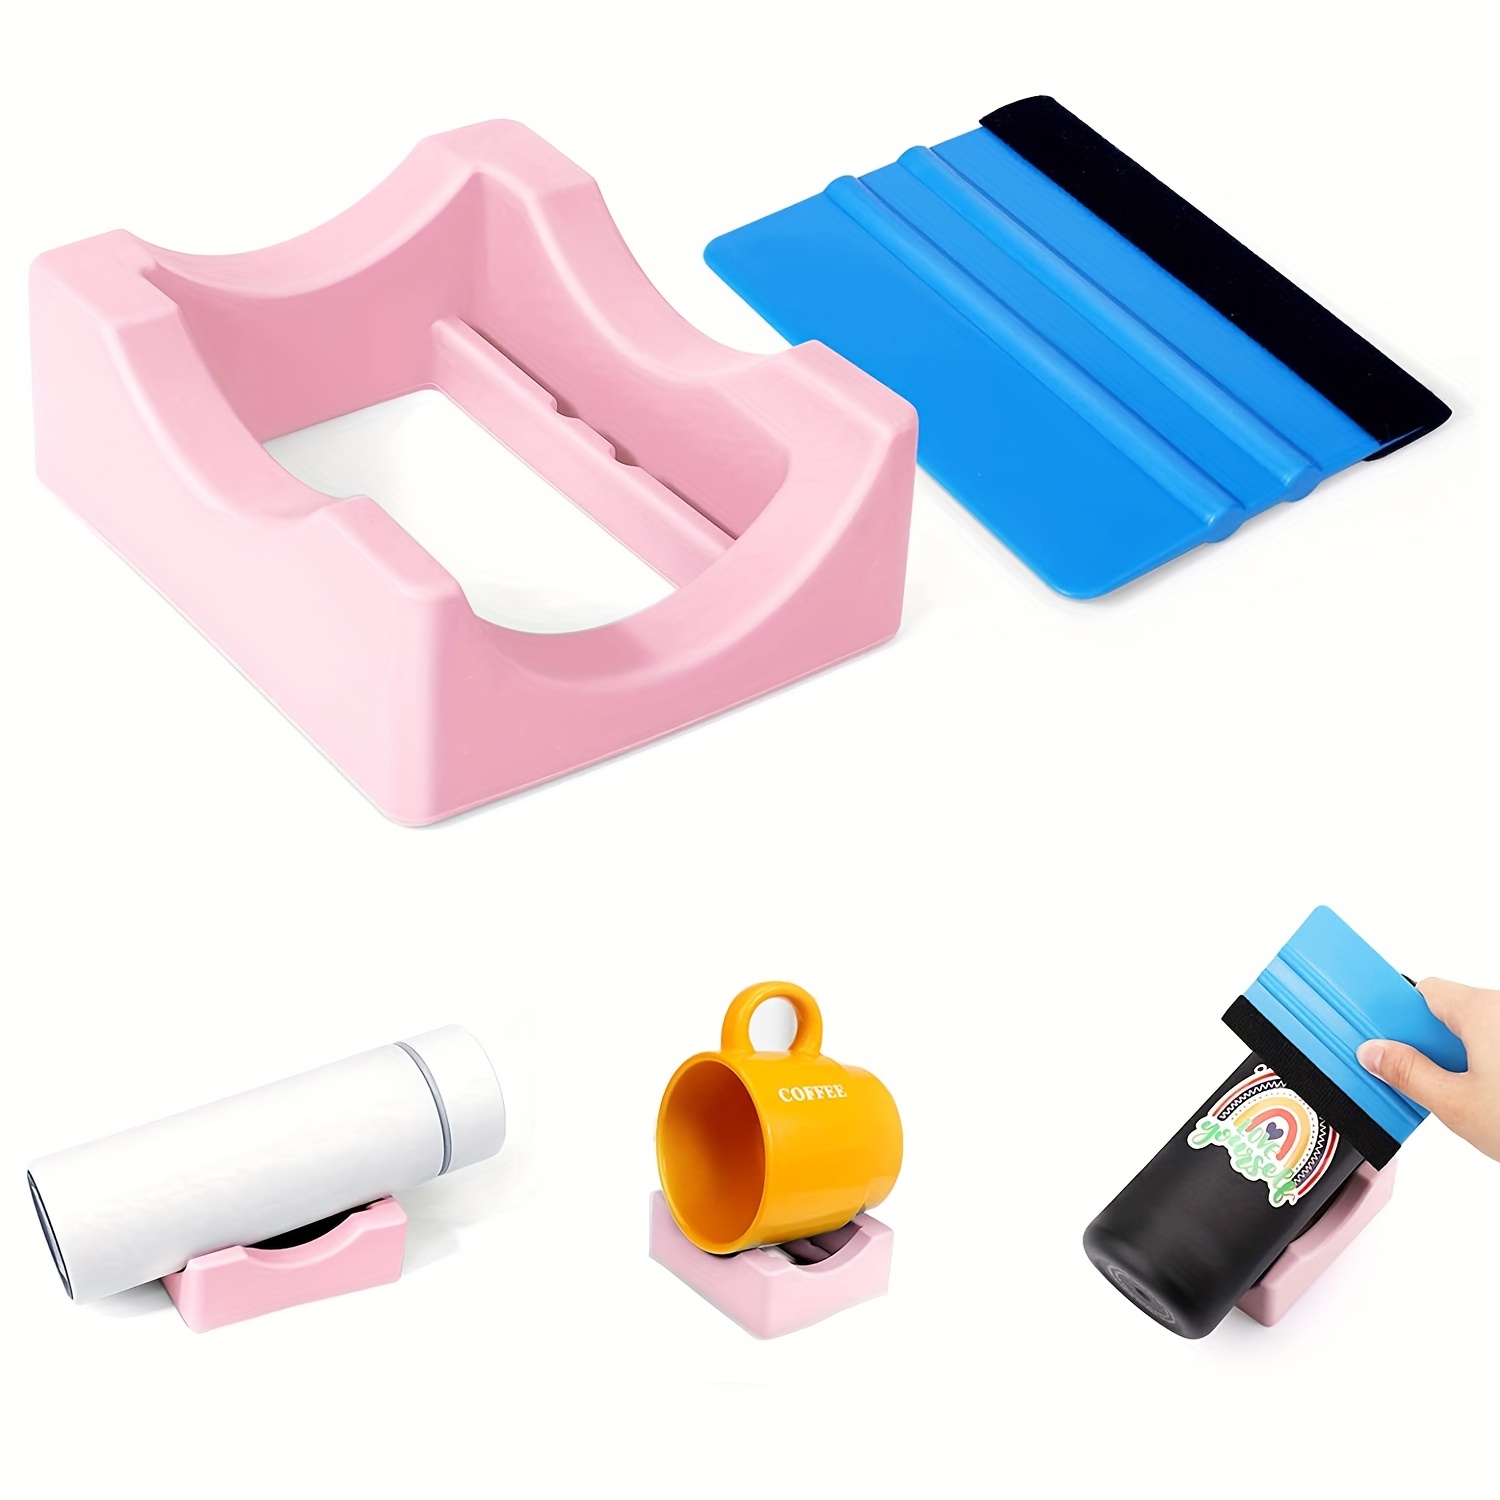 Silicone Cup Cradle For Tumblers With Built-in Slot, Anti-Slip Water Cup  Holder For Tumblers/Coffee Cups/Glass/water Bottles/Cans